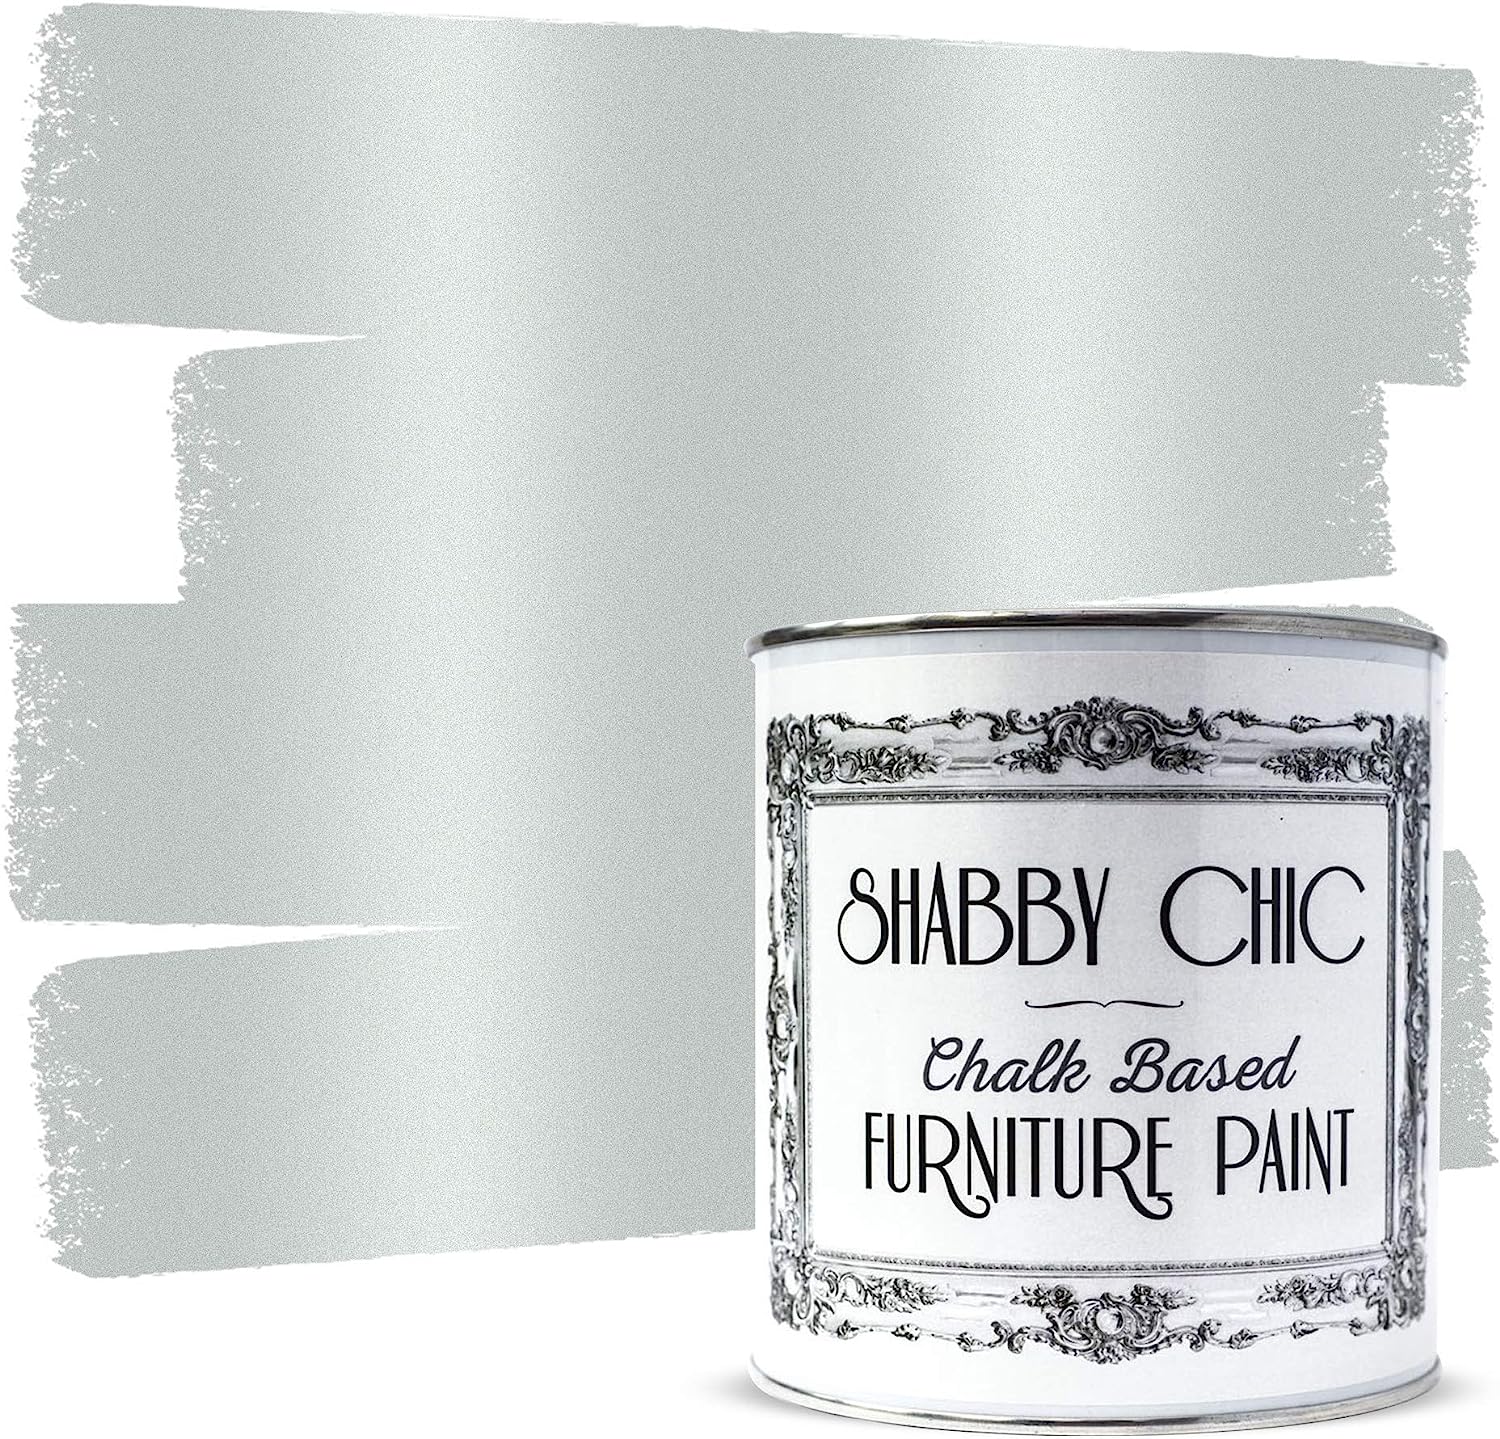 Shabby Chic Chalked Furniture Paint: Luxurious [...]